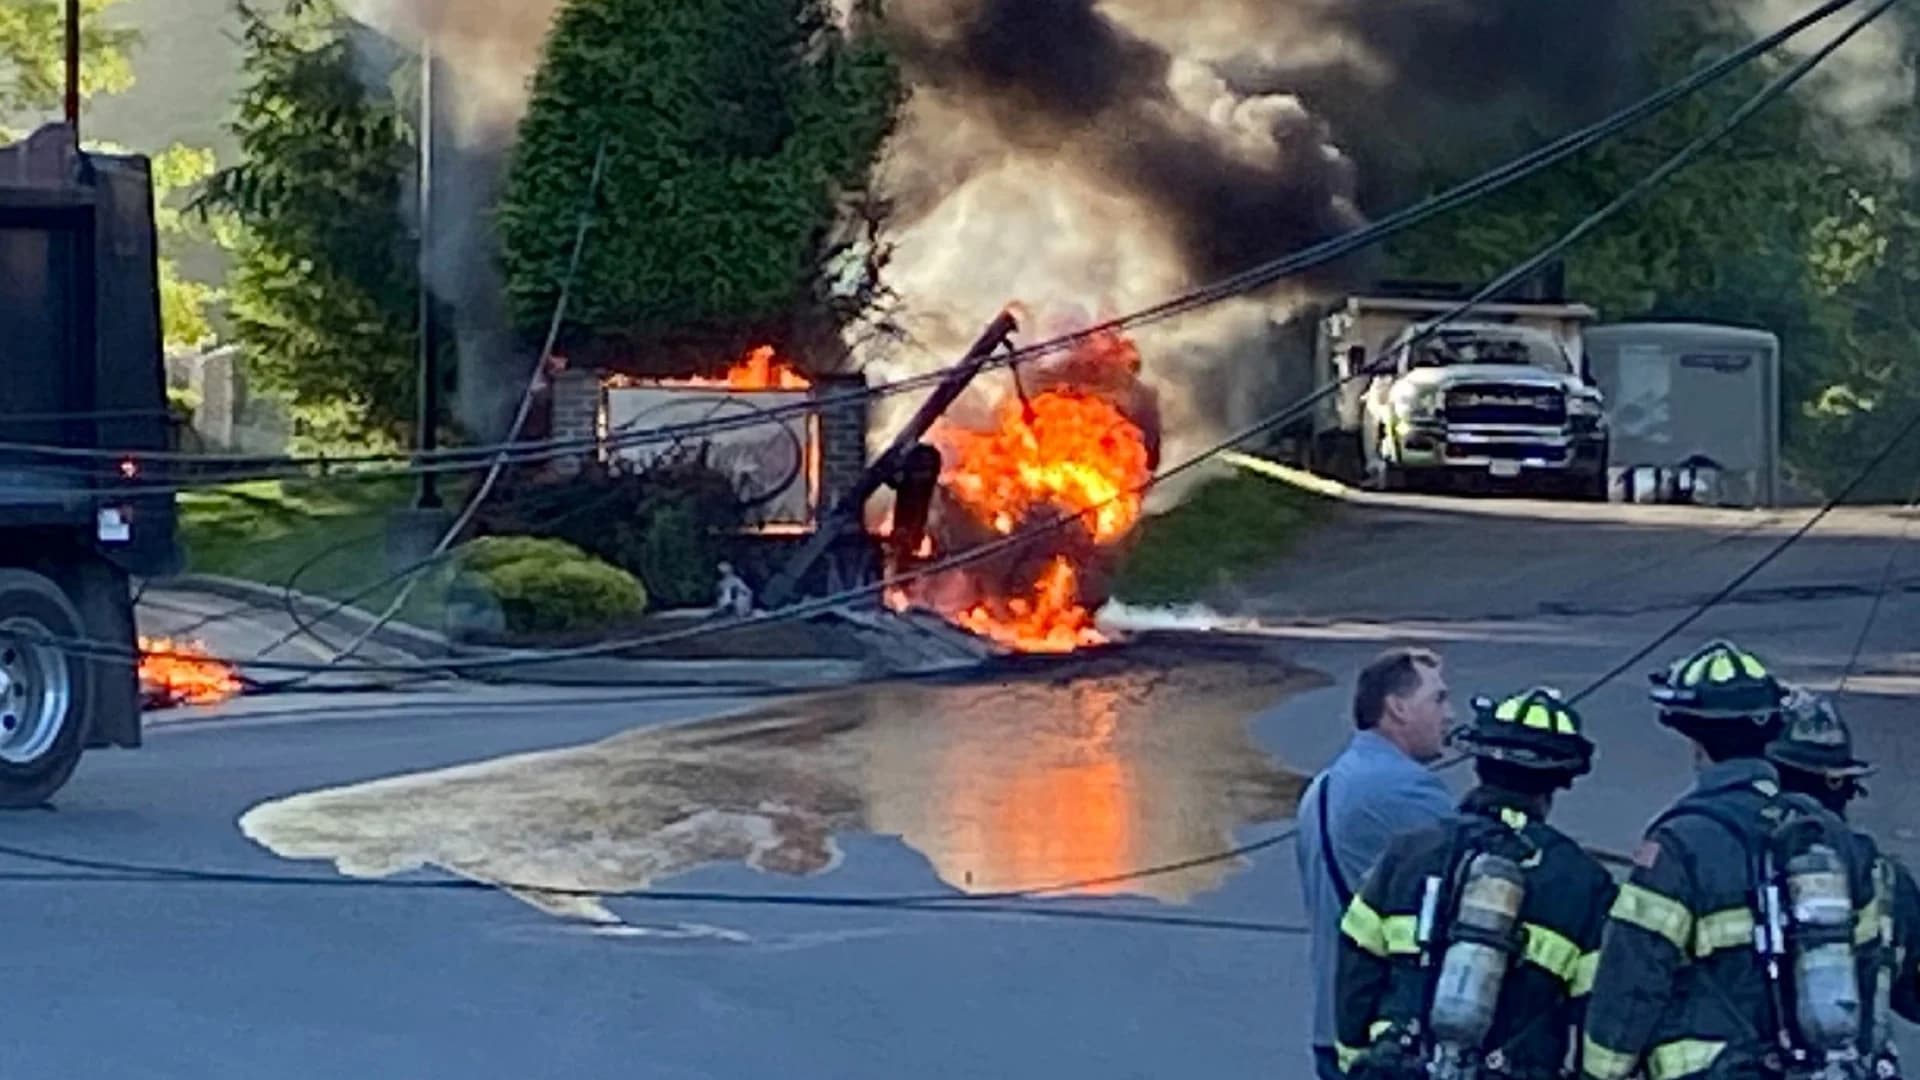 Truck tears down power lines, starts transformer fire in New City